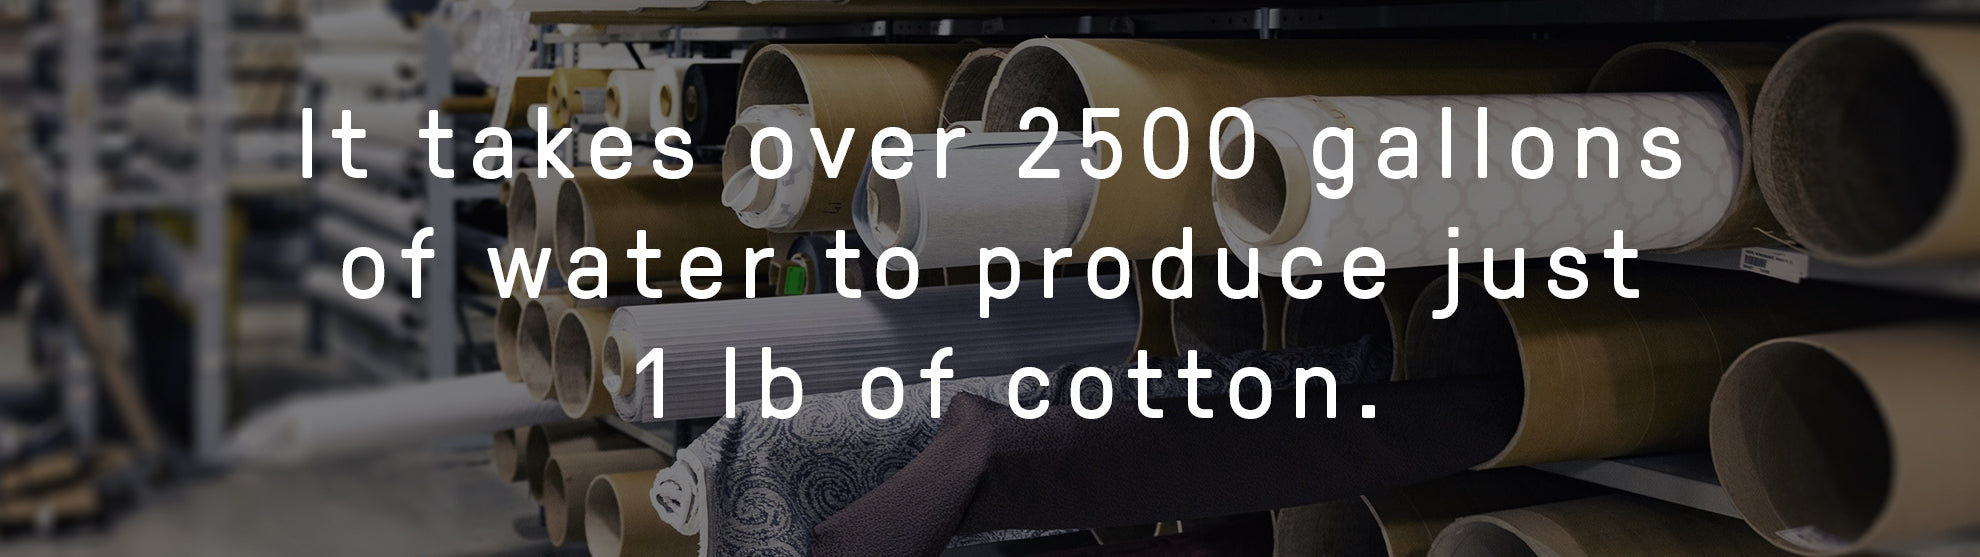 It takes over 2500 gallons of water to produce just 1 lb of cotton.